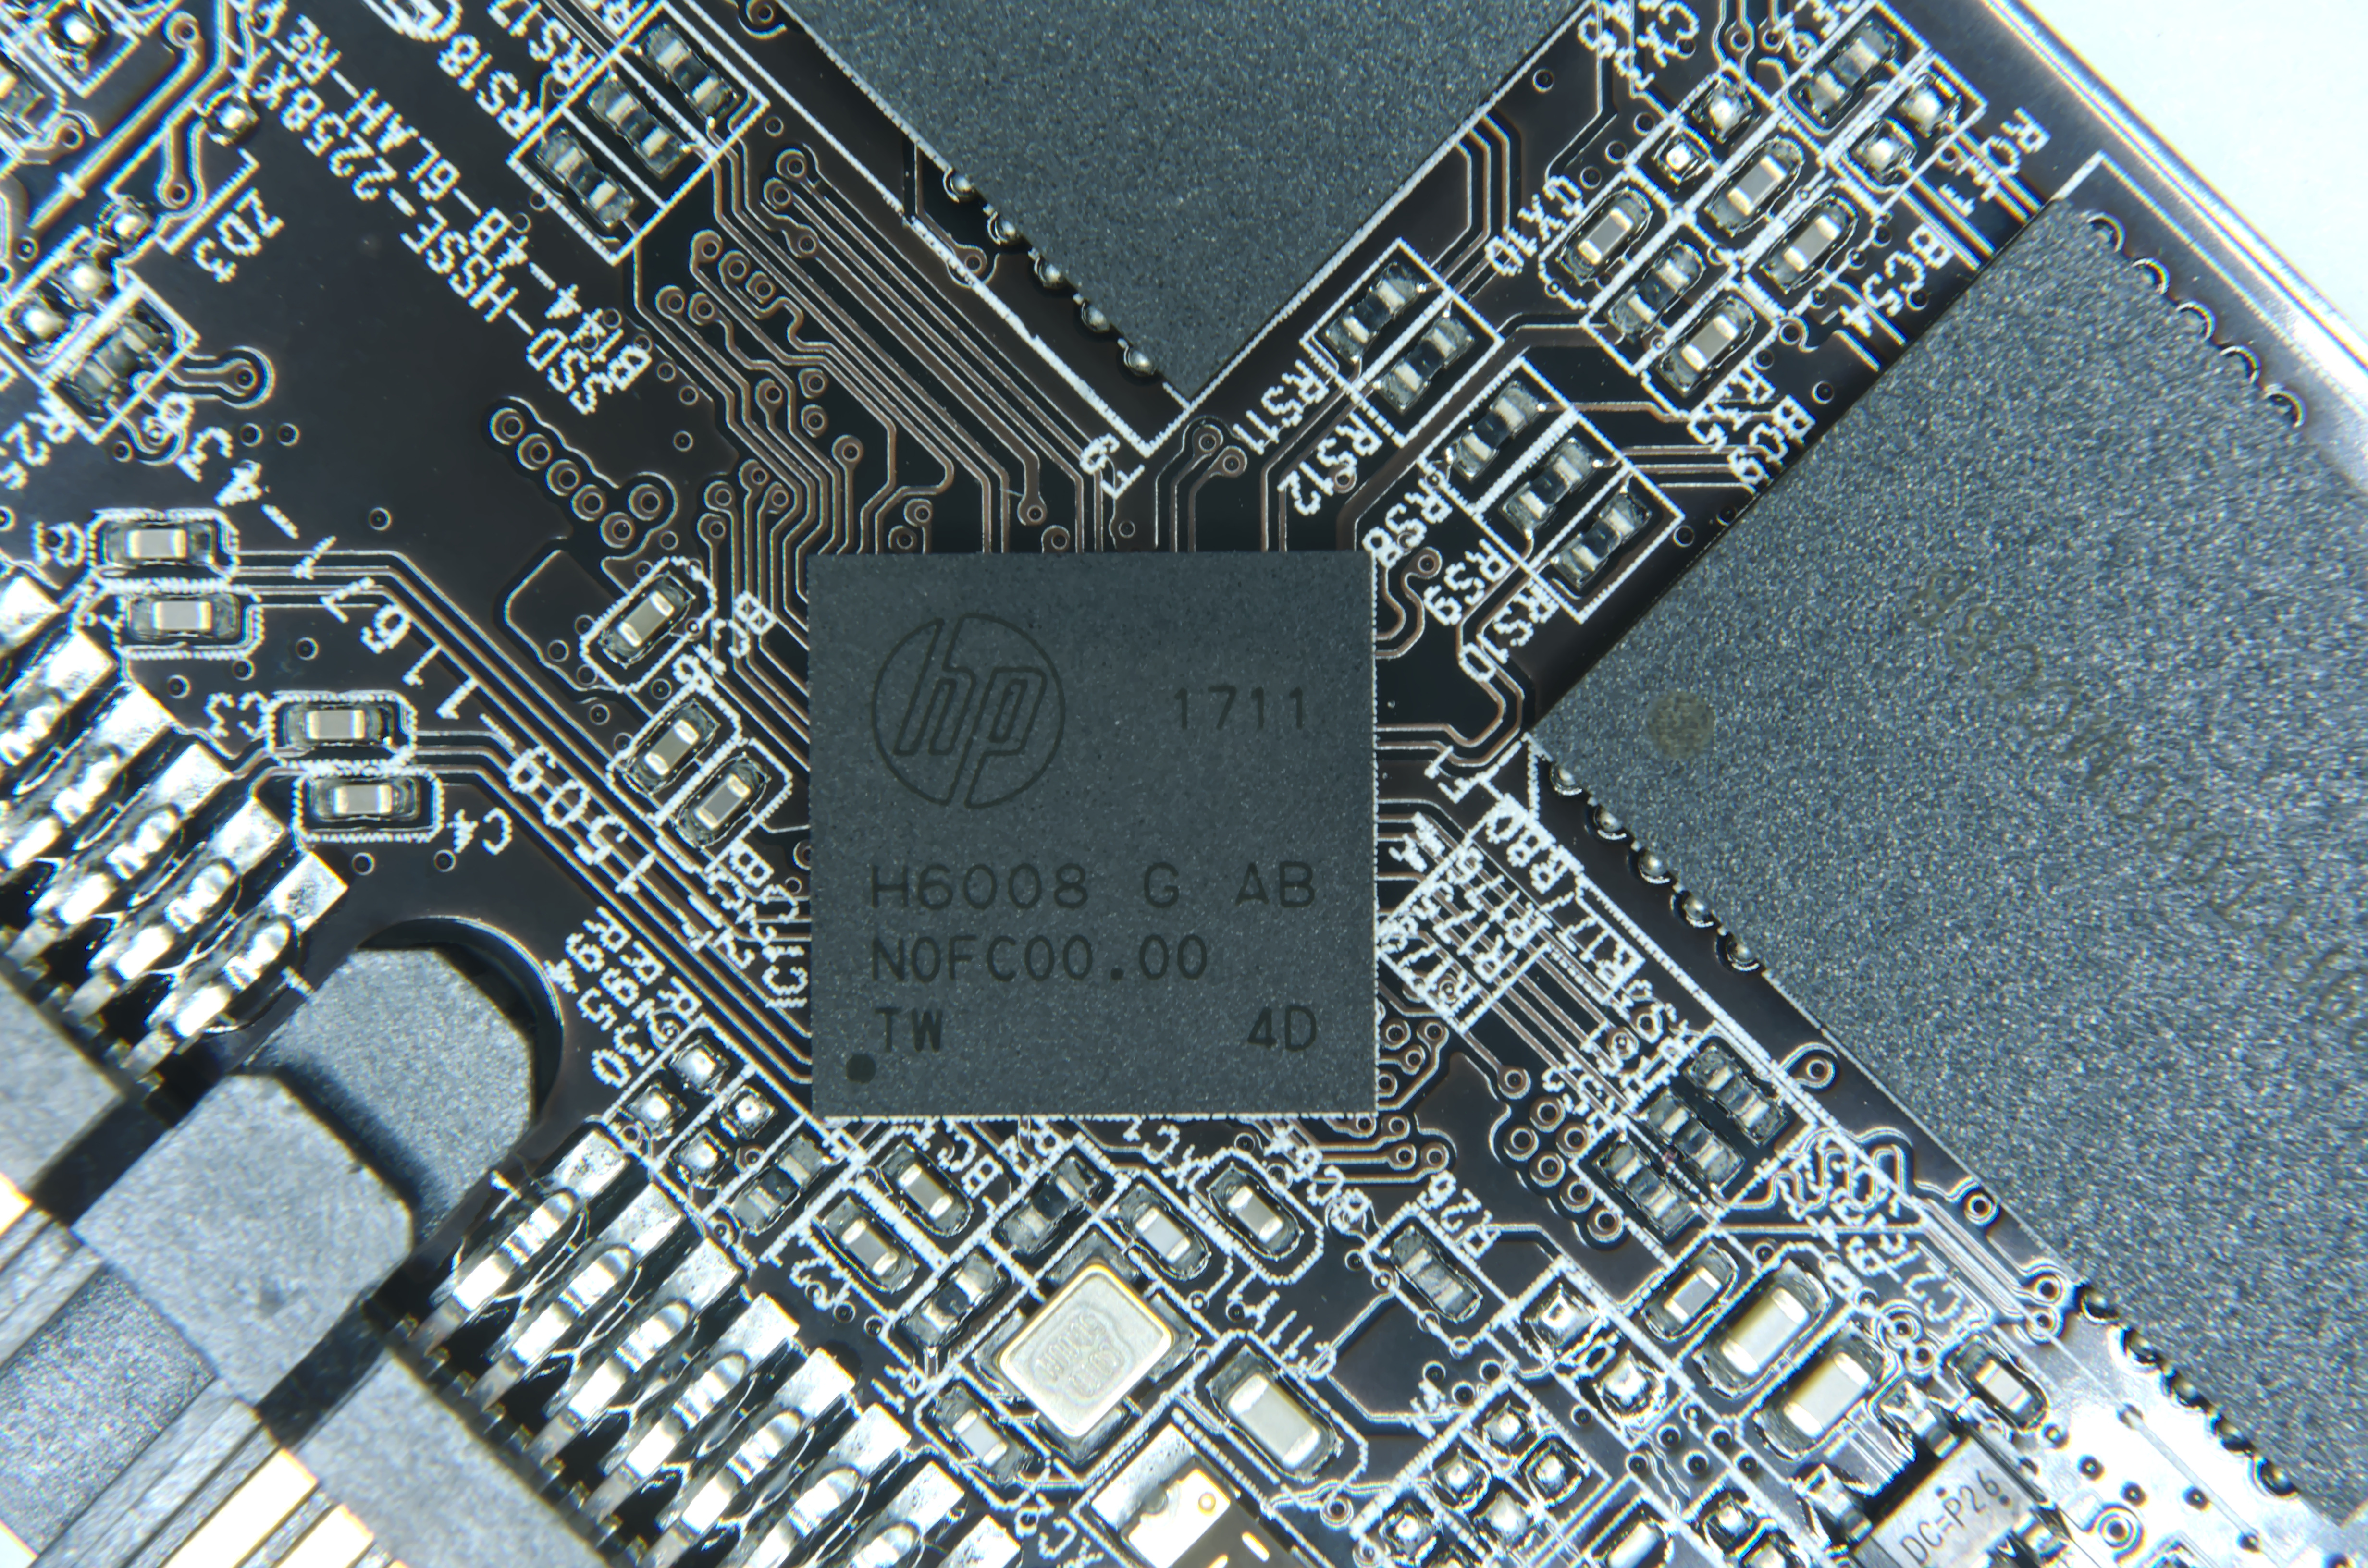 Conclusion - The HP S700 And S700 Pro SSD Review